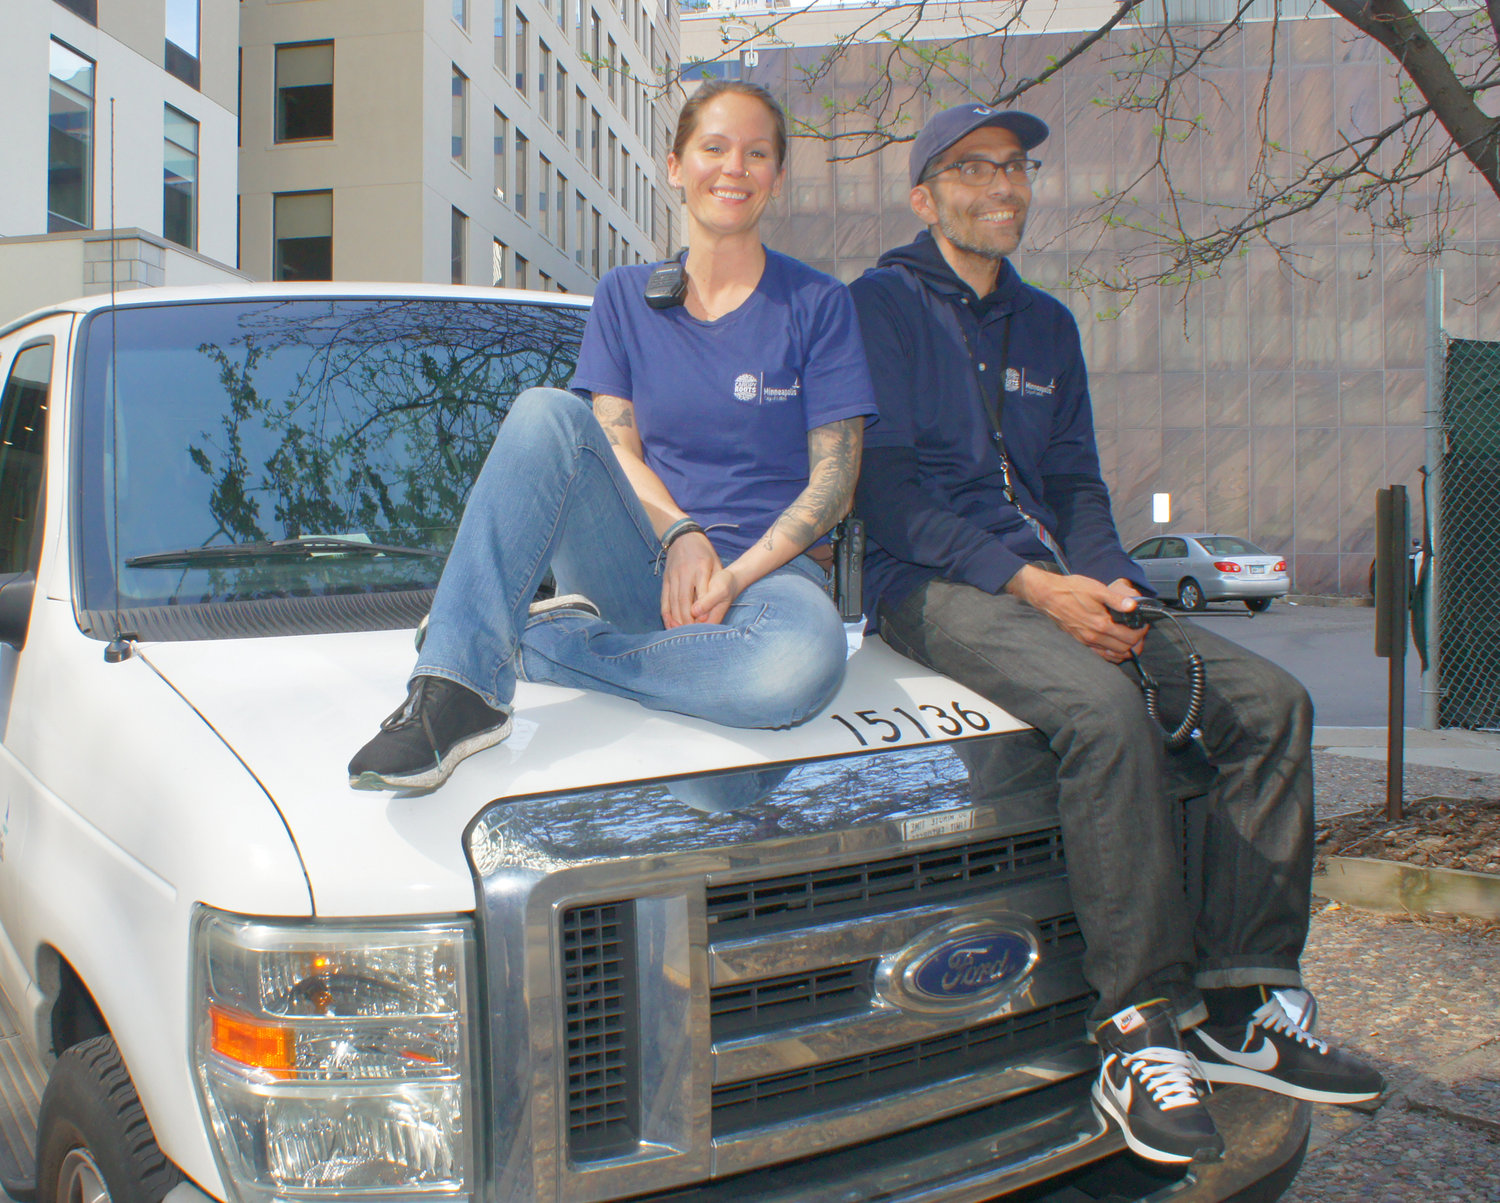 Crisis Responders Amy Brueckner (left) and Dean Zoller pose on one of the two BCR vans. The vans do not use bright lights or sirens. Responders wear navy blue shirts or jackets with "Behavioral Crisis Response" printed on the back. Responders are not armed, and seek to calm the situation. They maintain kindness and respect. They help the person in crisis and provide resources for further support. (Photo by Terry Faust)